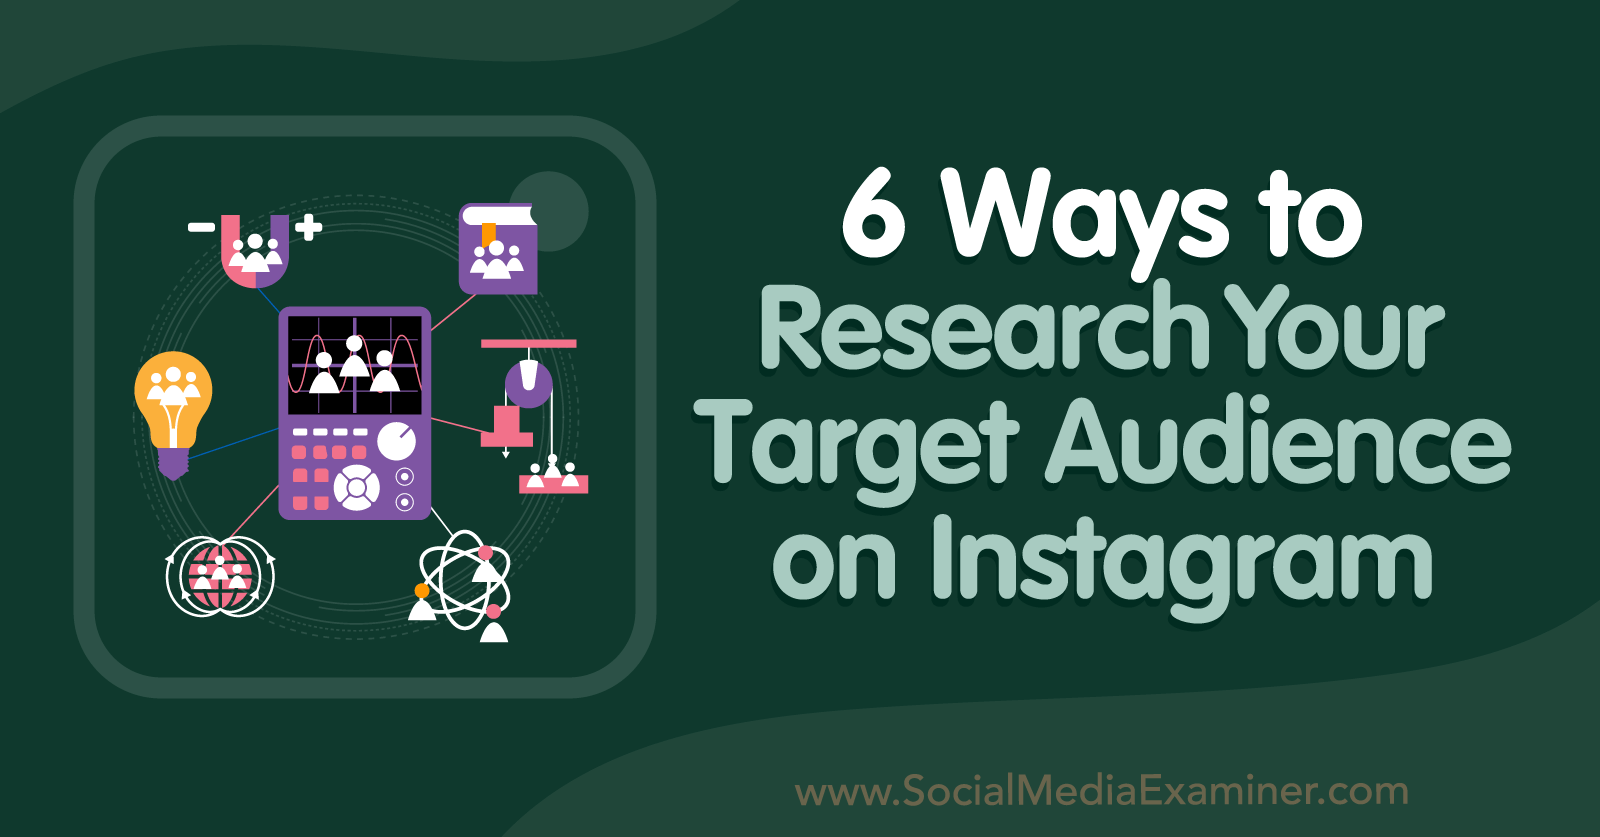 6 Ways to Research Your Target Audience on Instagram-Social Media Examiner